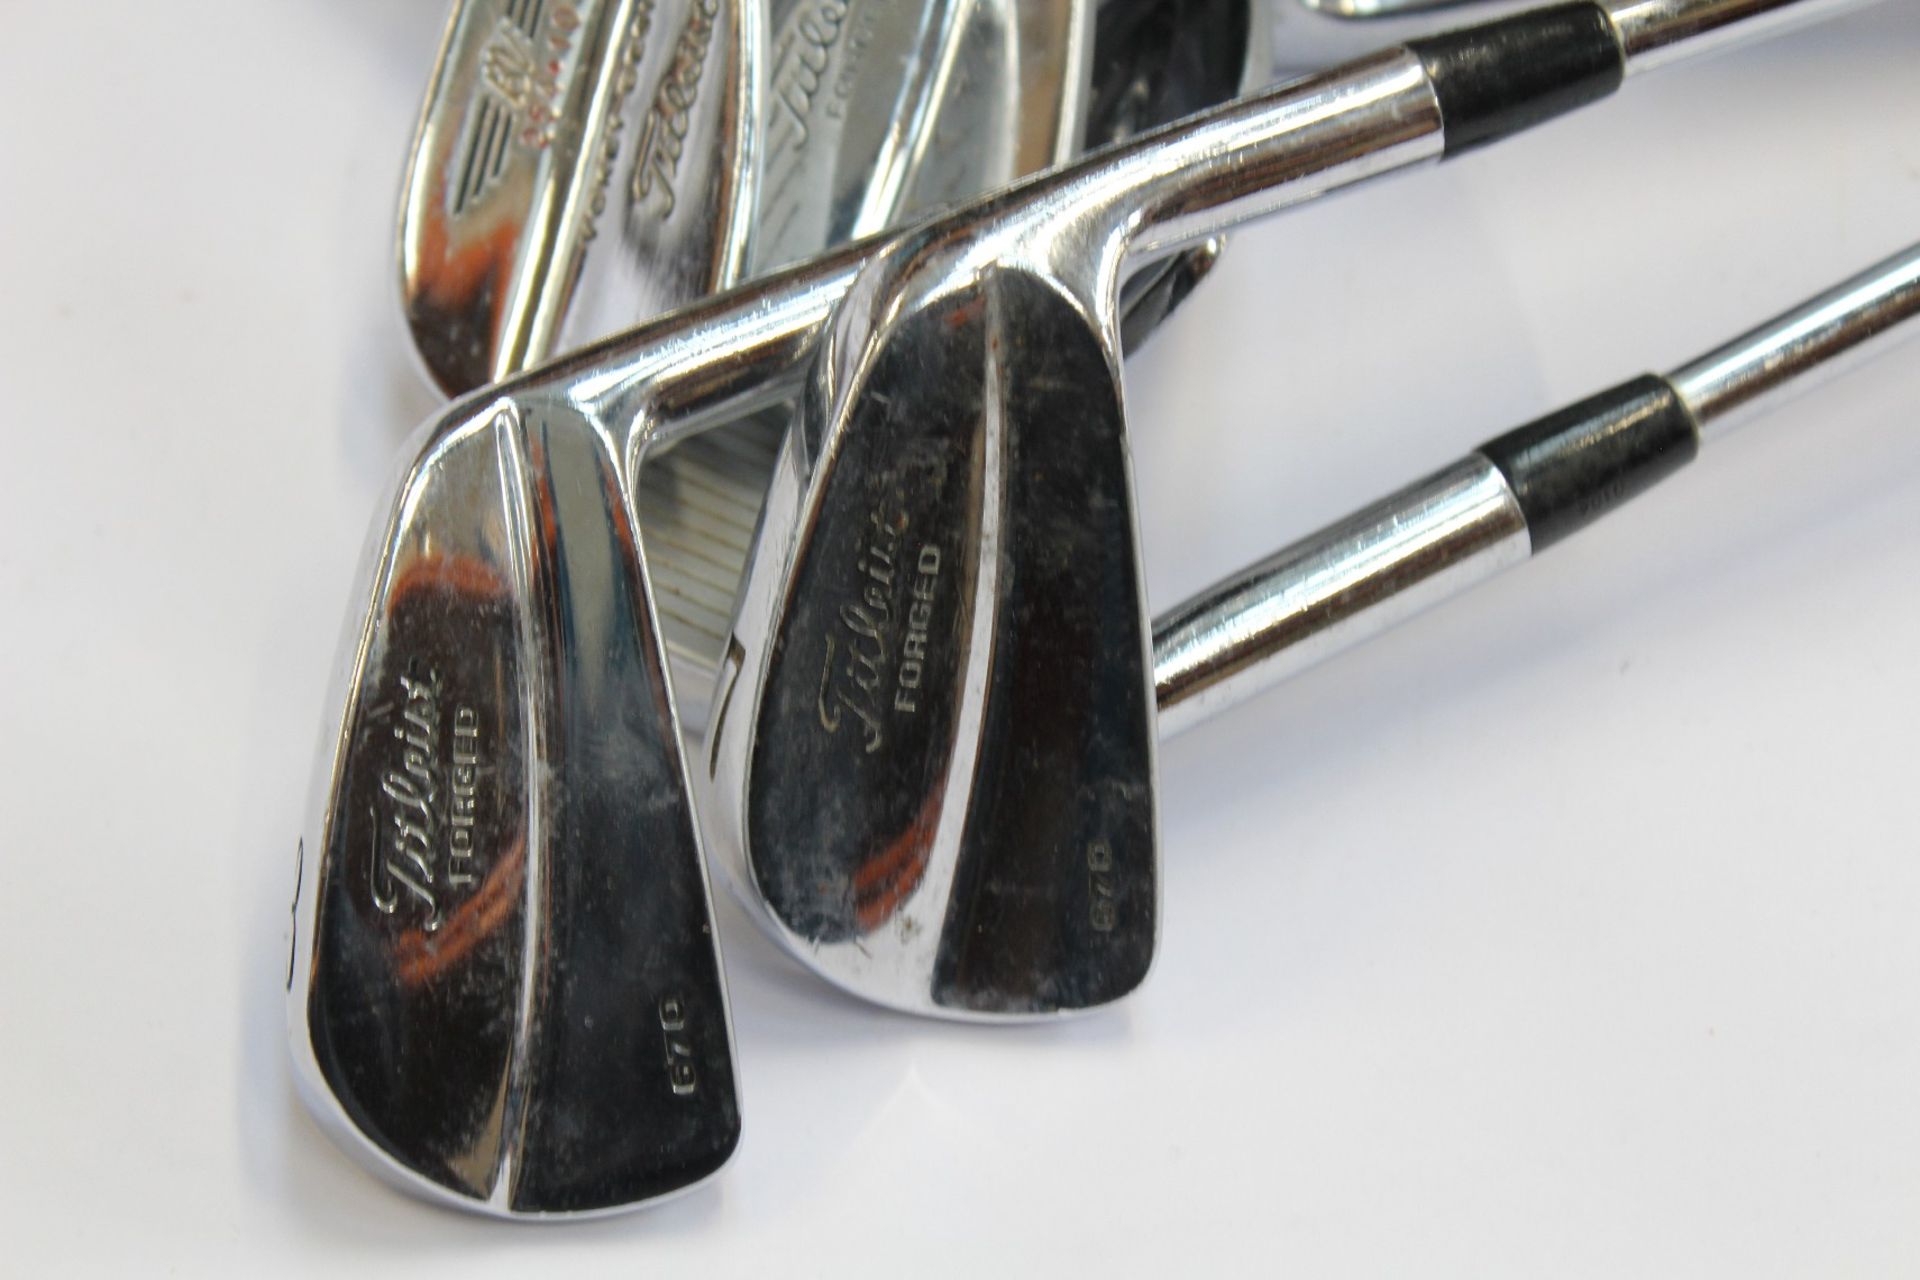 Eleven pre-owned Titleist 670 and Vokey design forged golf clubs to include clubs (2,3,4,5,6,7,8,9,